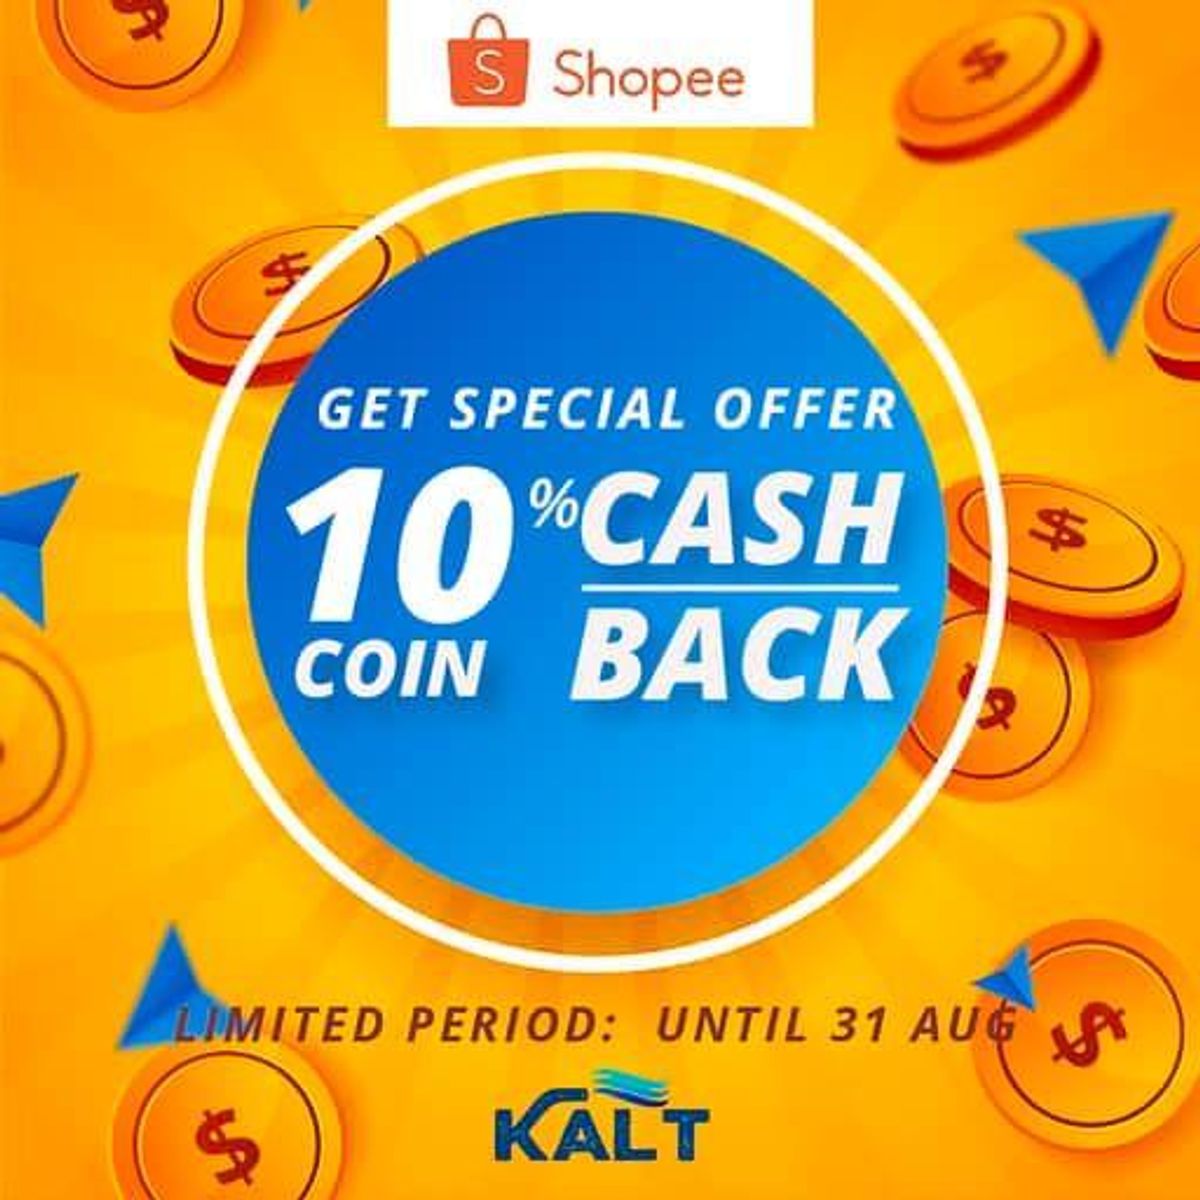 Shopee 10% Coin Cash Back Campaign